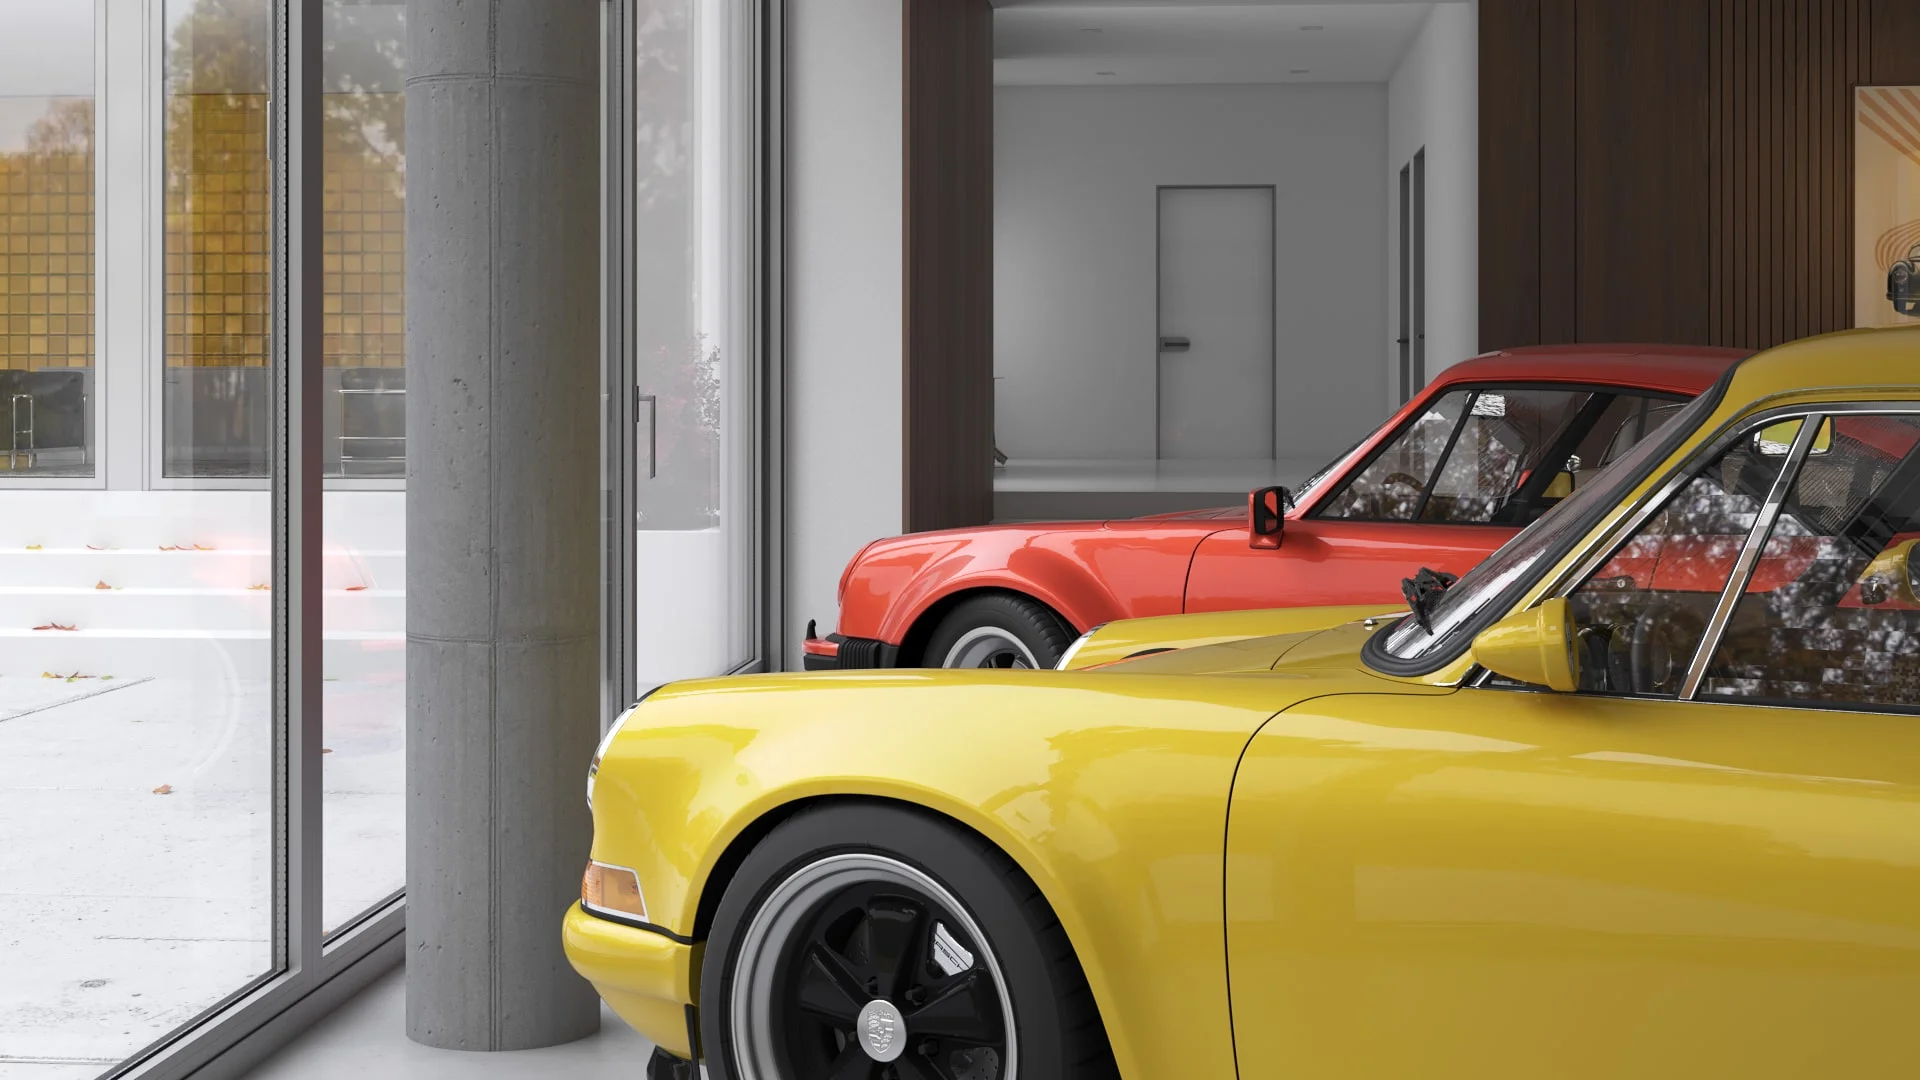 Architectural visualization. Single-family house with Porsche garage_16